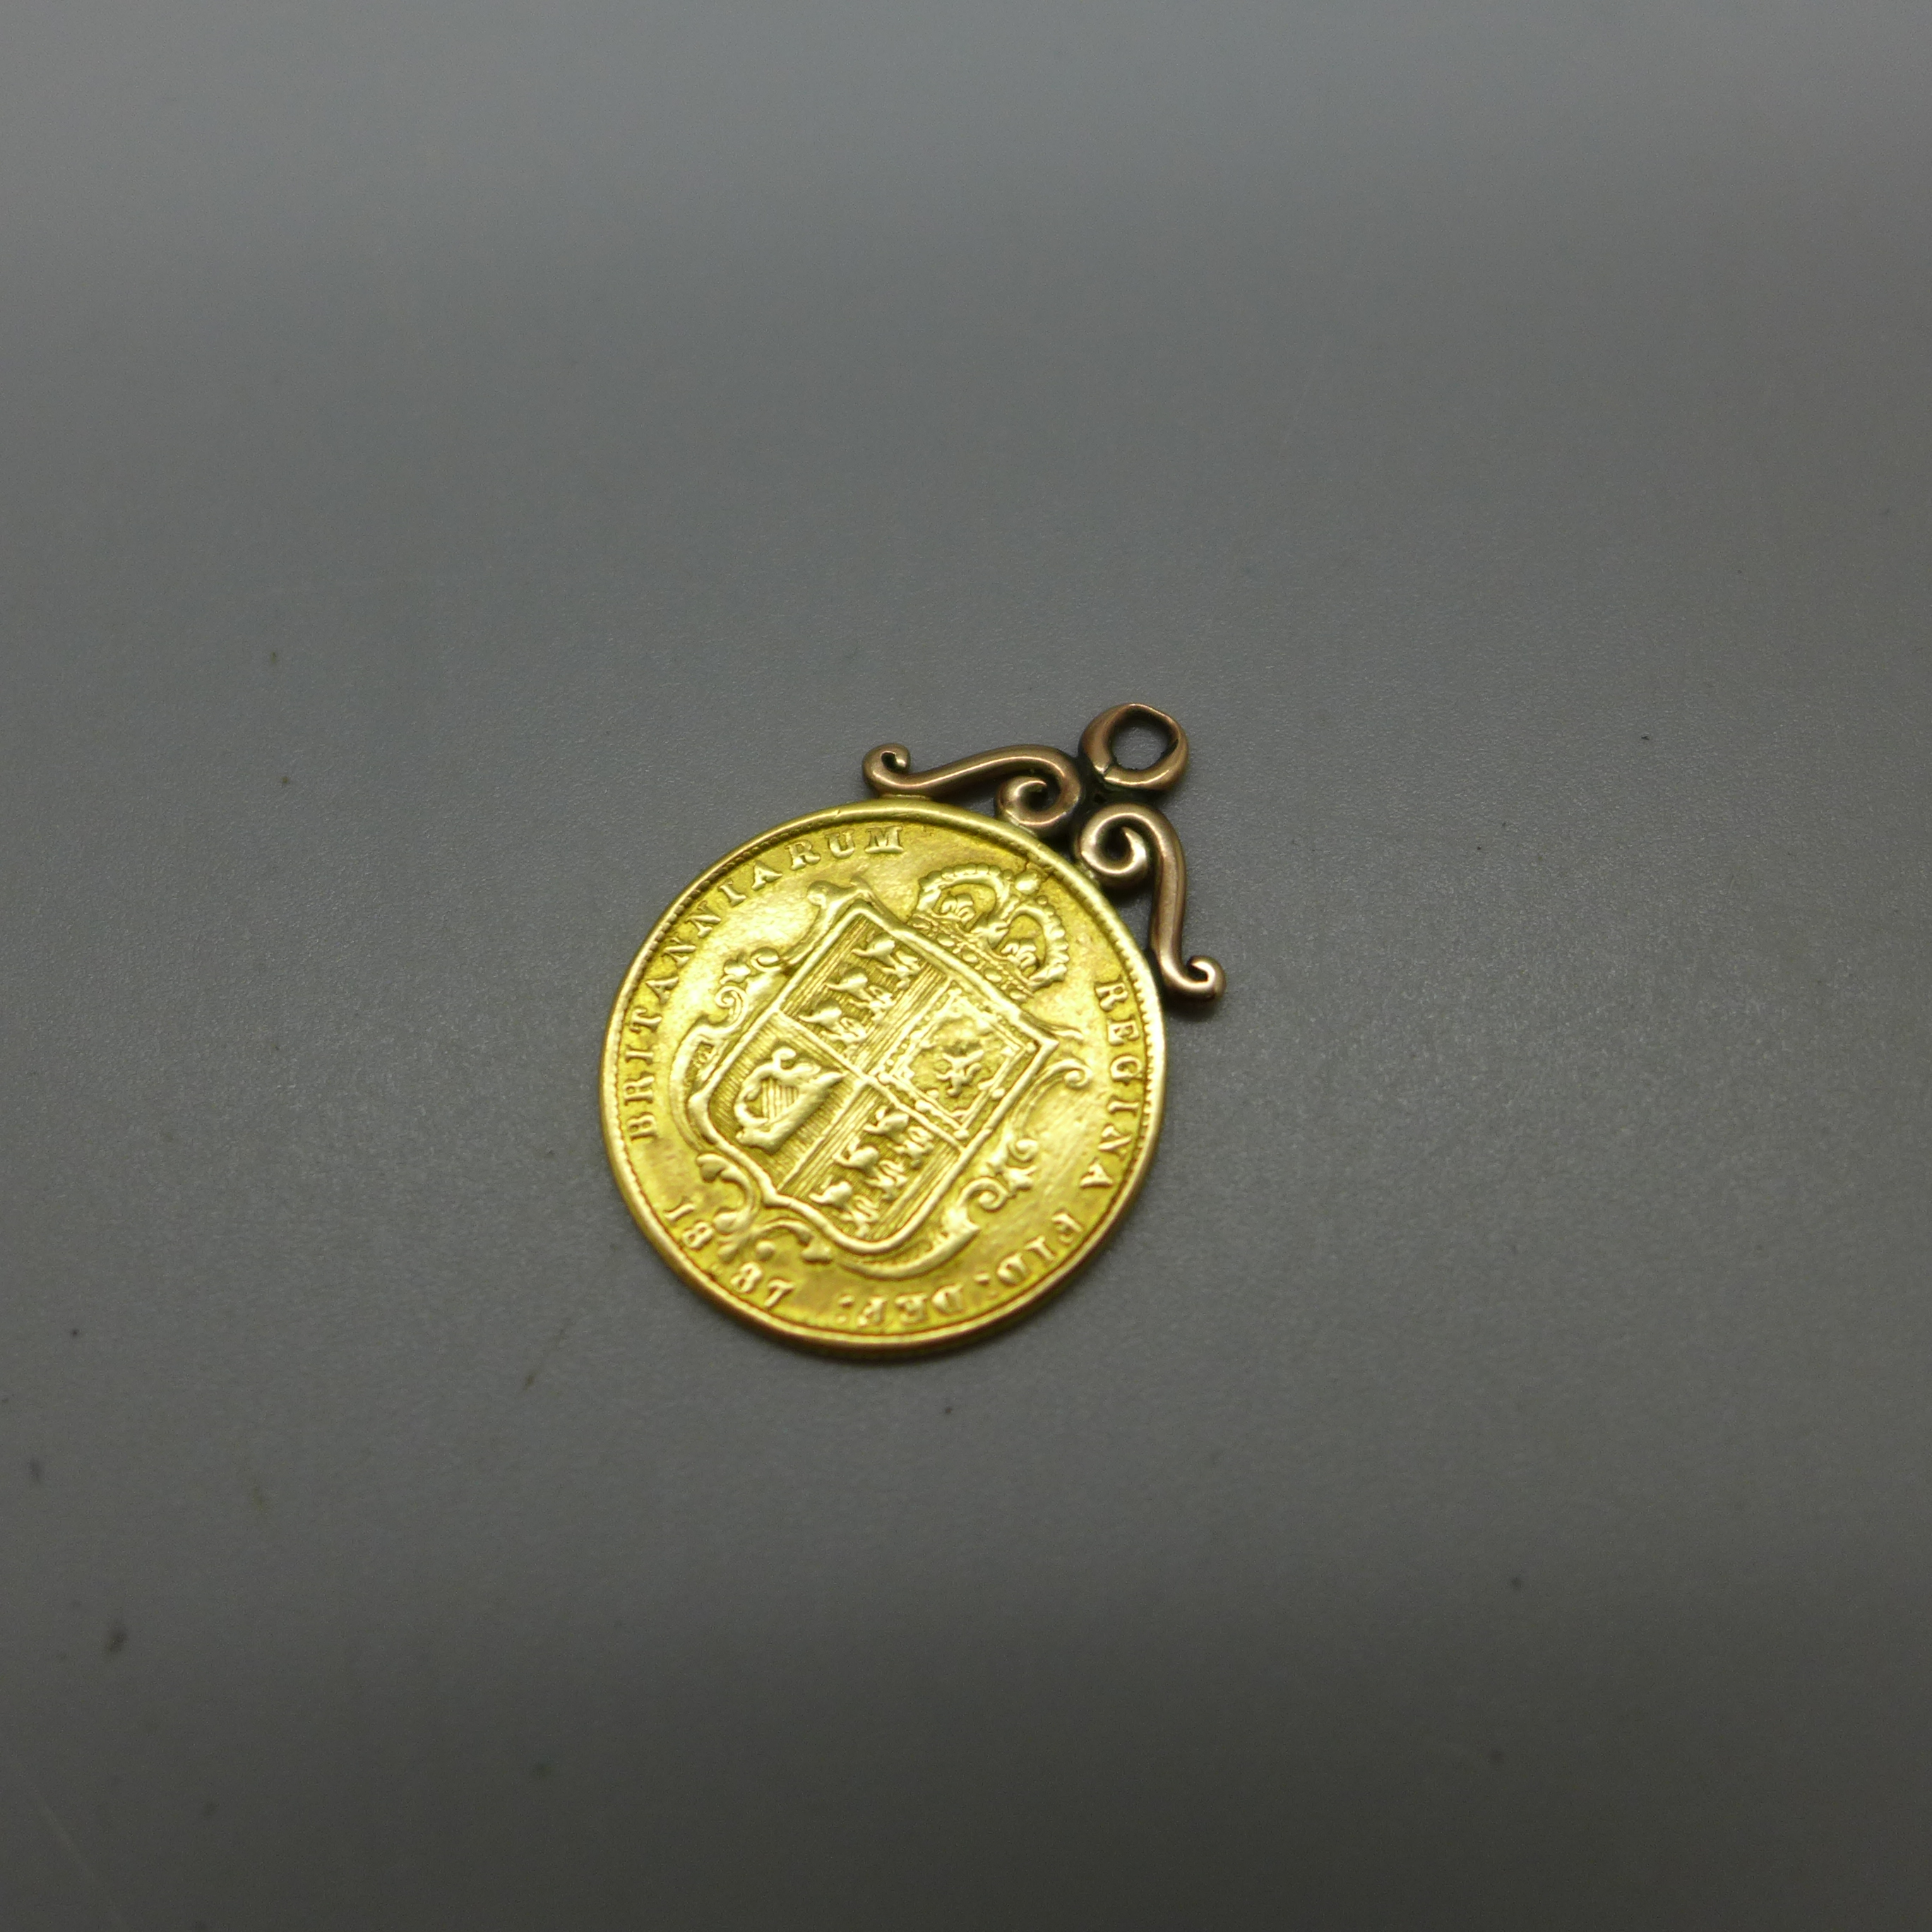 A Victorian 1887 half sovereign with pendant mount, Melbourne Mint, total weight 4.3g - Image 2 of 2